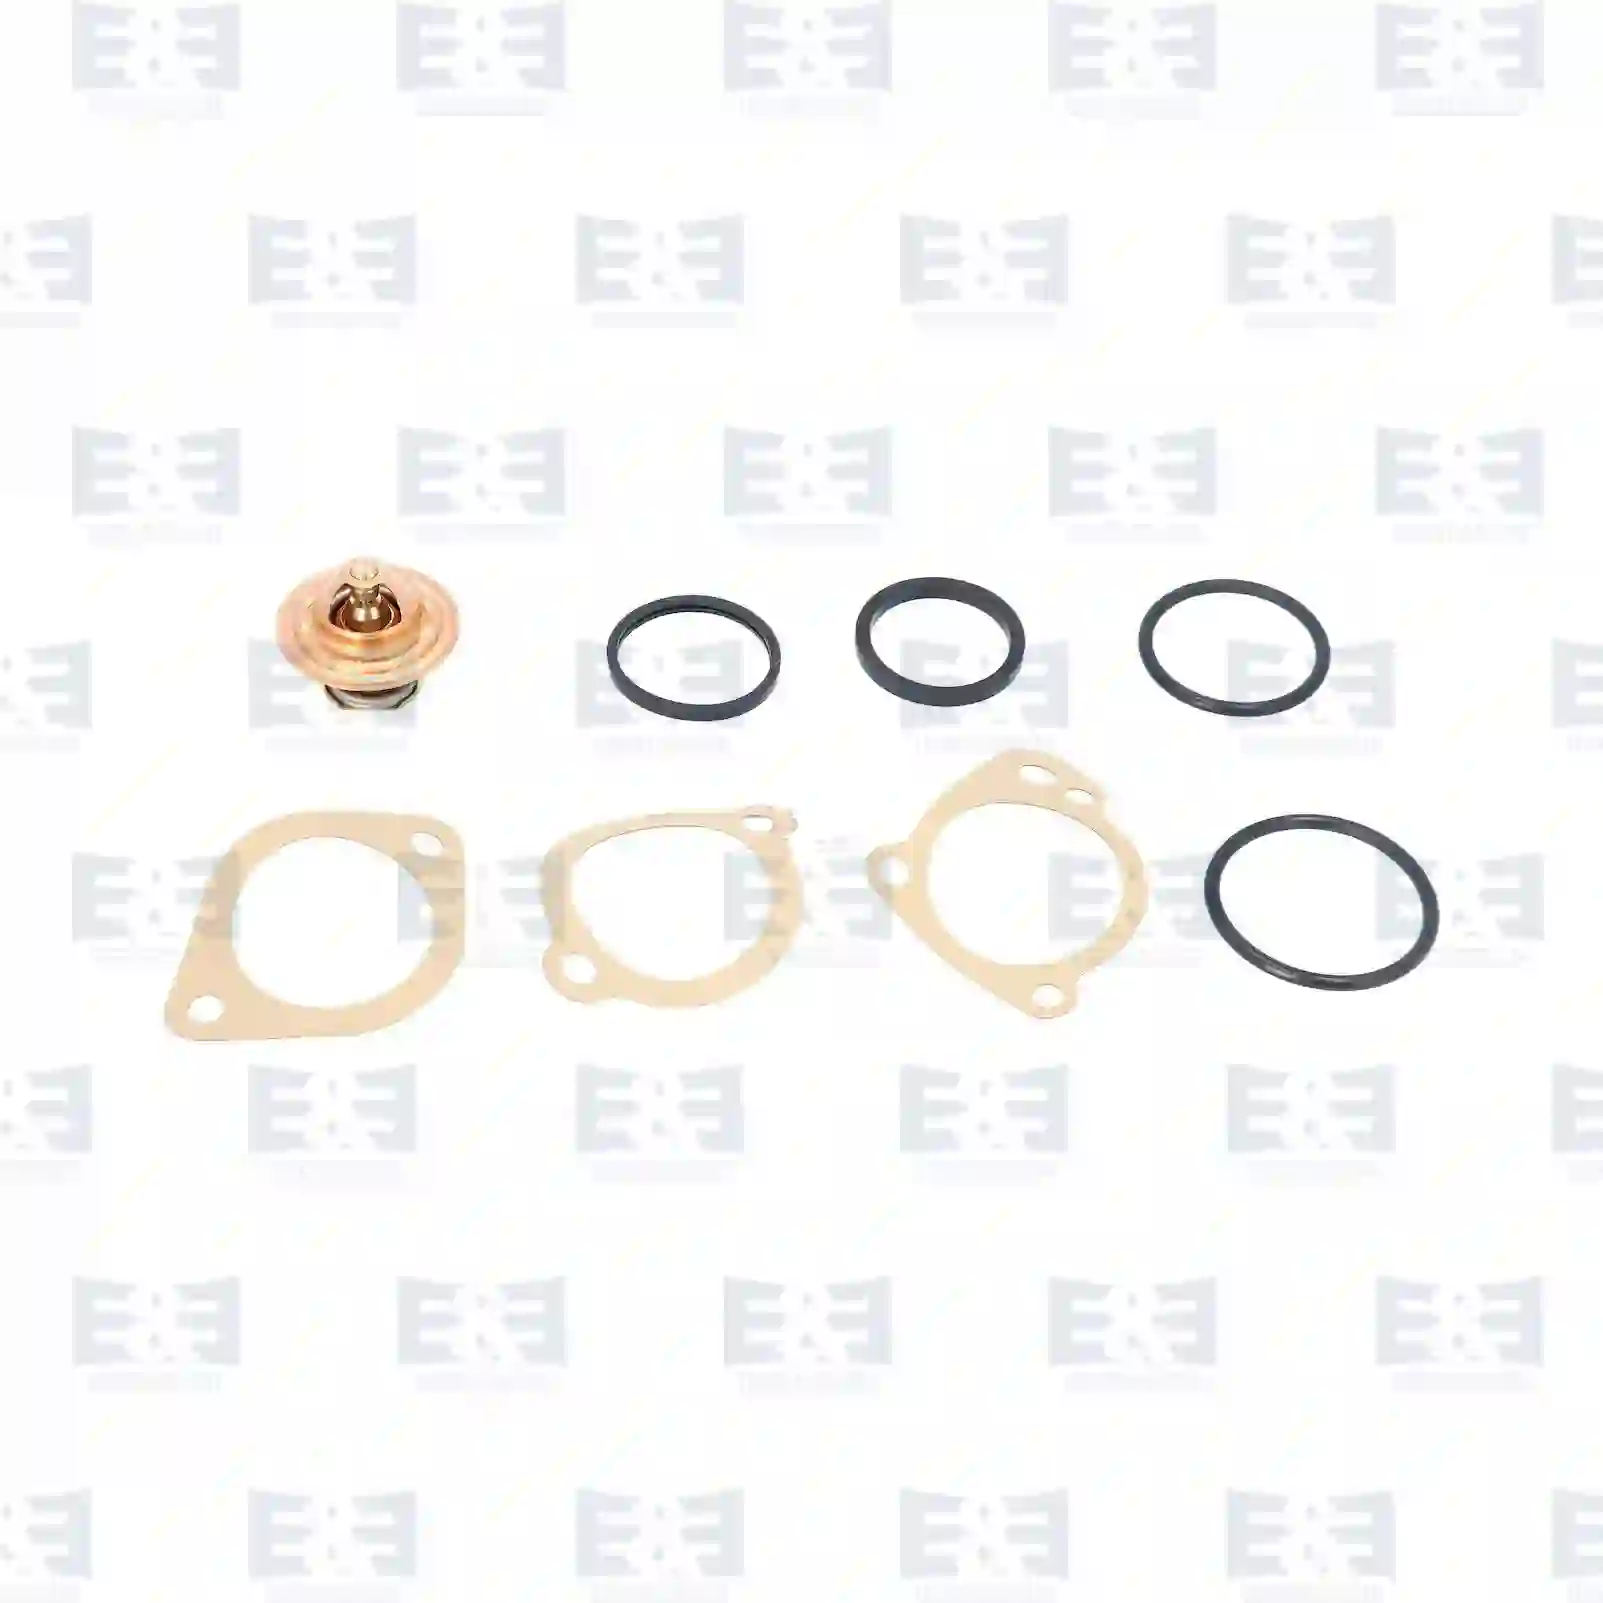 Thermostat, with gasket, 2E2203786, 1635905, 85HF-8575-AA ||  2E2203786 E&E Truck Spare Parts | Truck Spare Parts, Auotomotive Spare Parts Thermostat, with gasket, 2E2203786, 1635905, 85HF-8575-AA ||  2E2203786 E&E Truck Spare Parts | Truck Spare Parts, Auotomotive Spare Parts